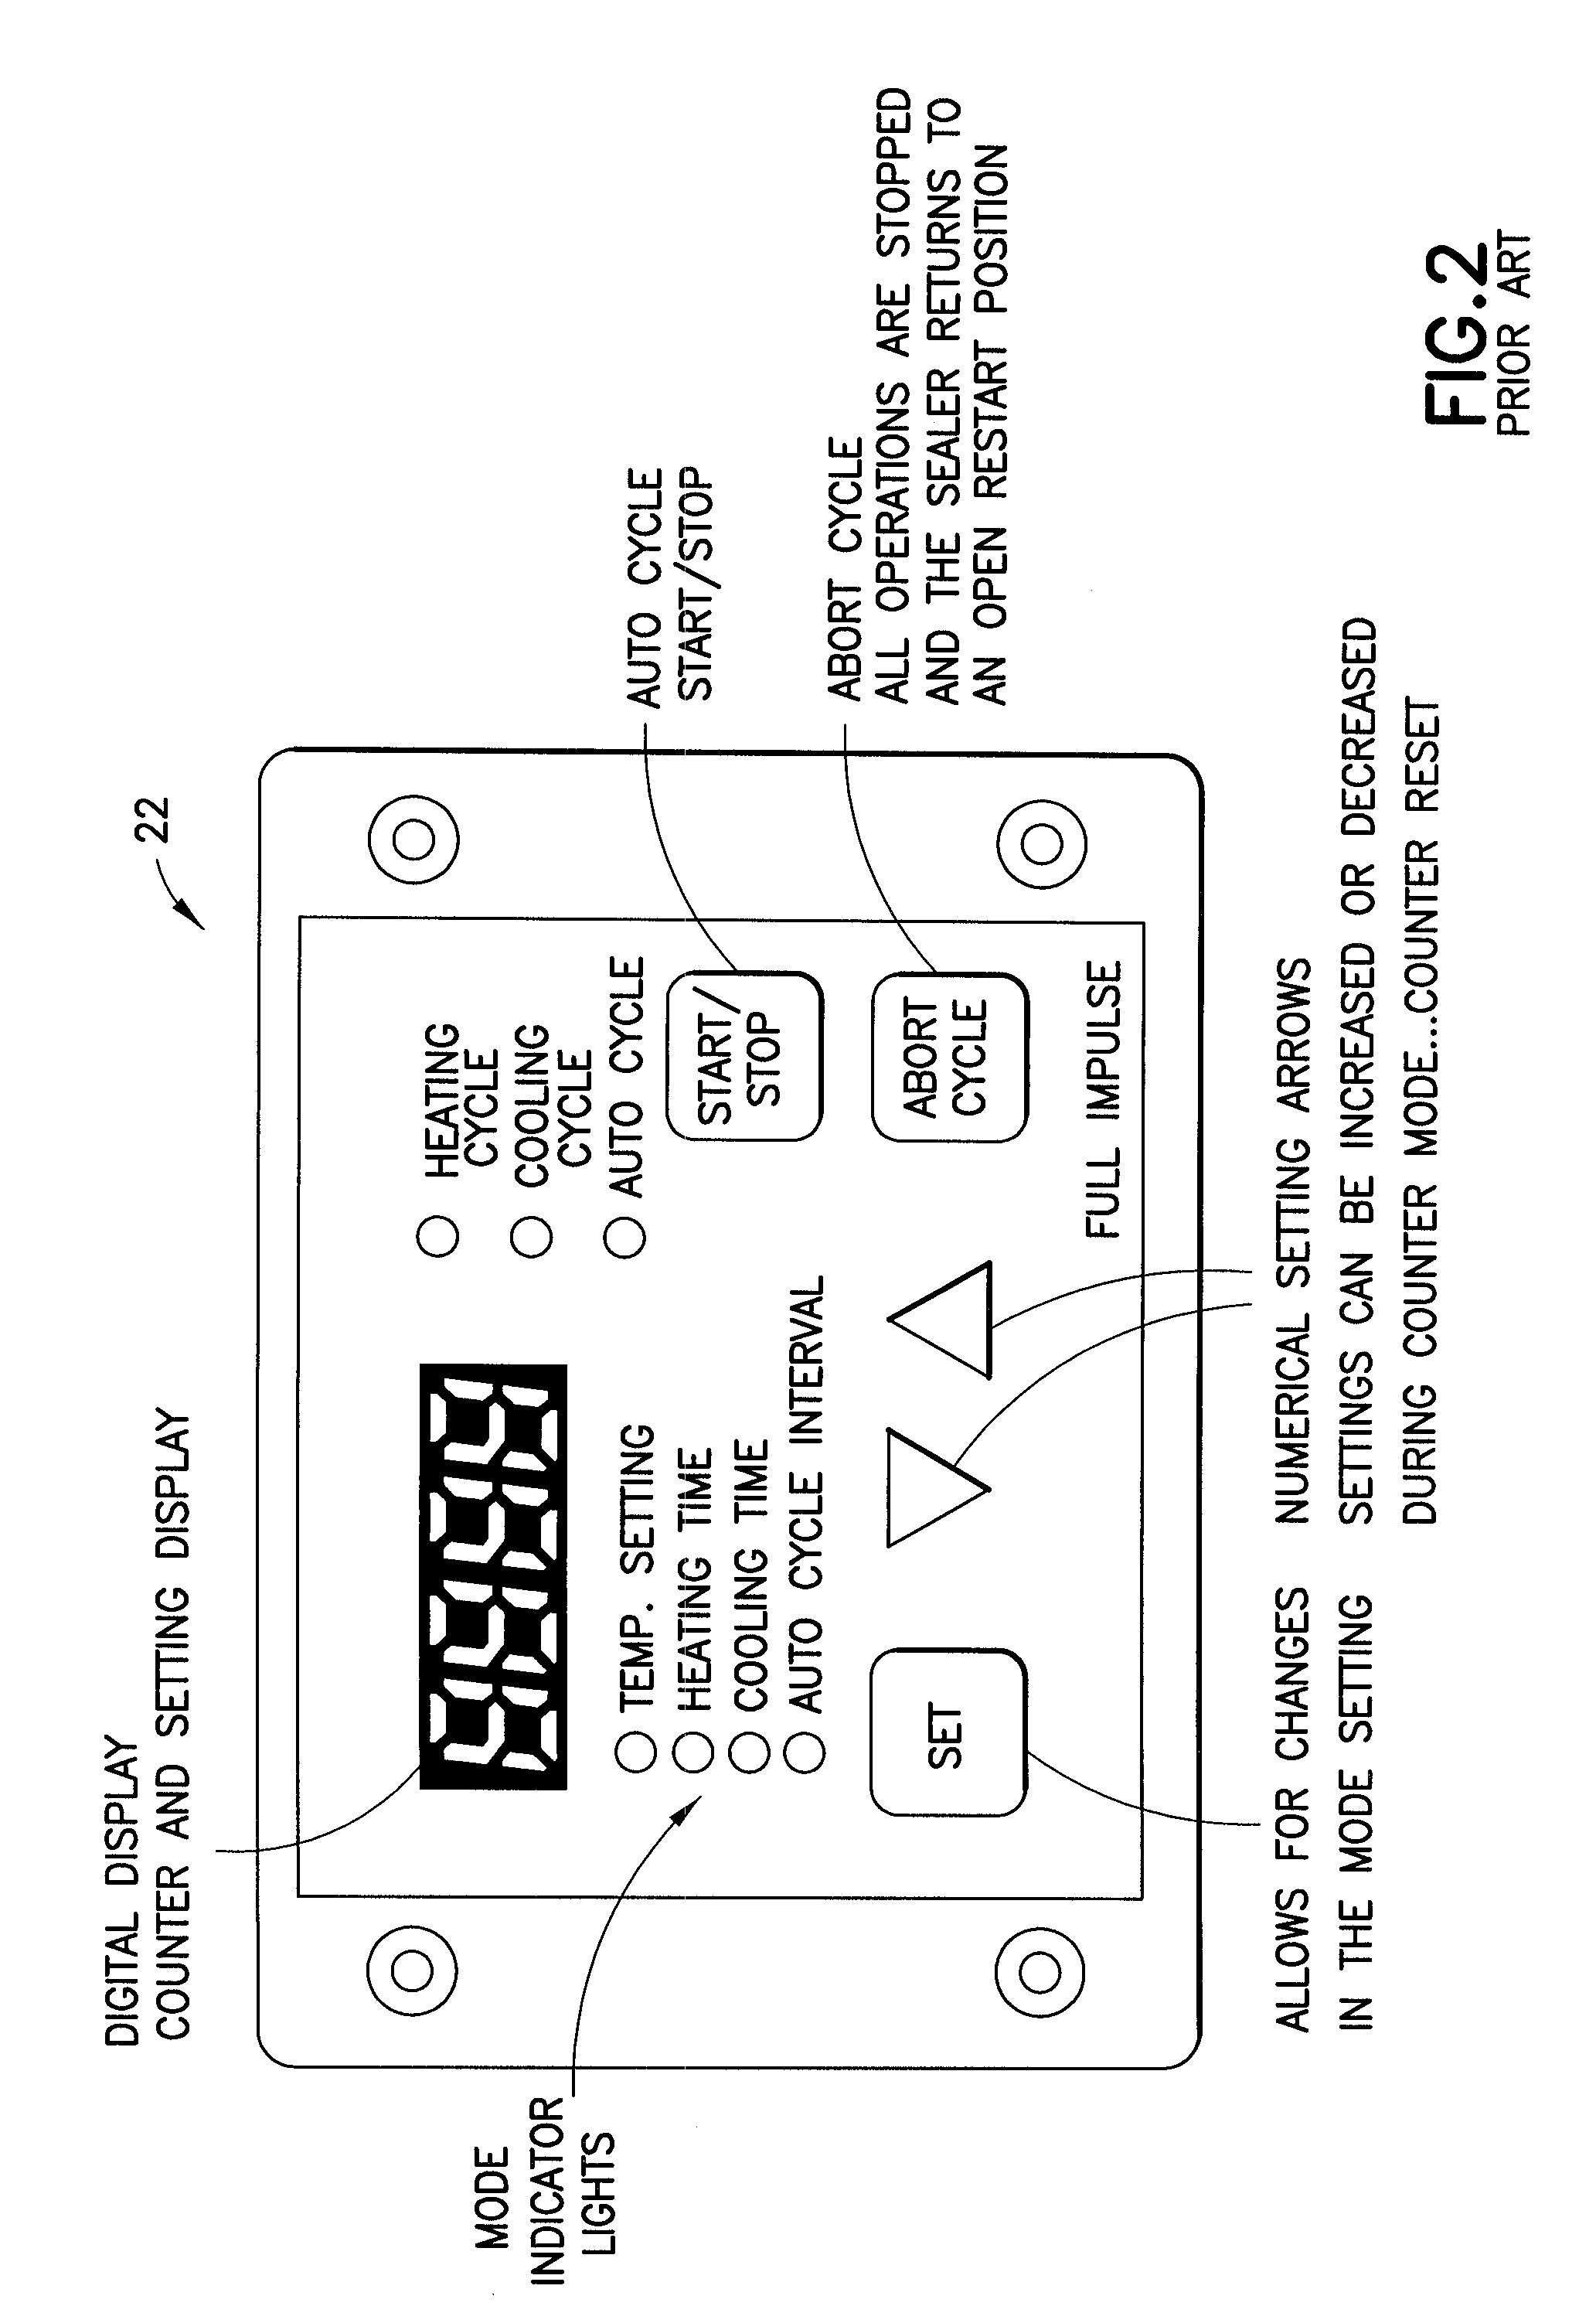 Method and device for inspecting and monitoring the seal integrity of sterile packages